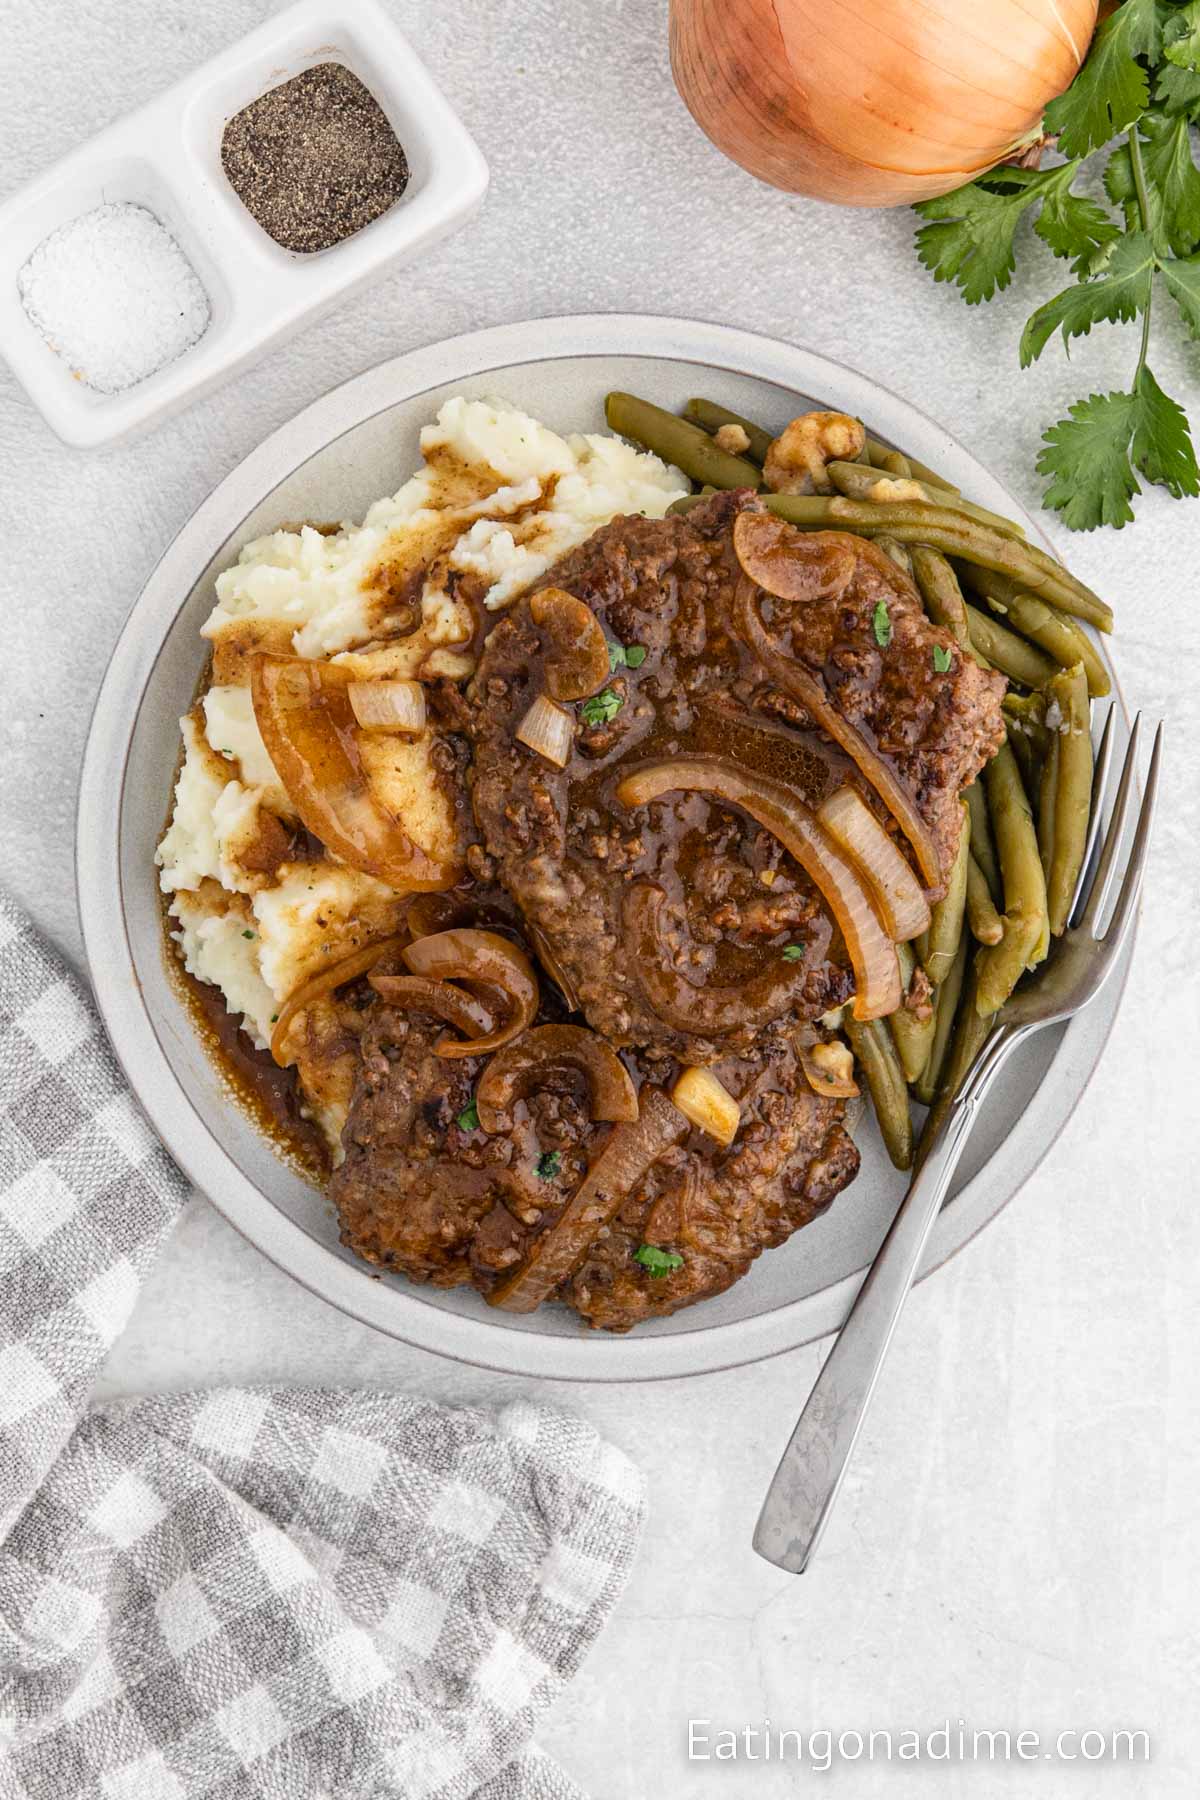 Cube Steak and gravy on a plate with mashed potatoes and green beans